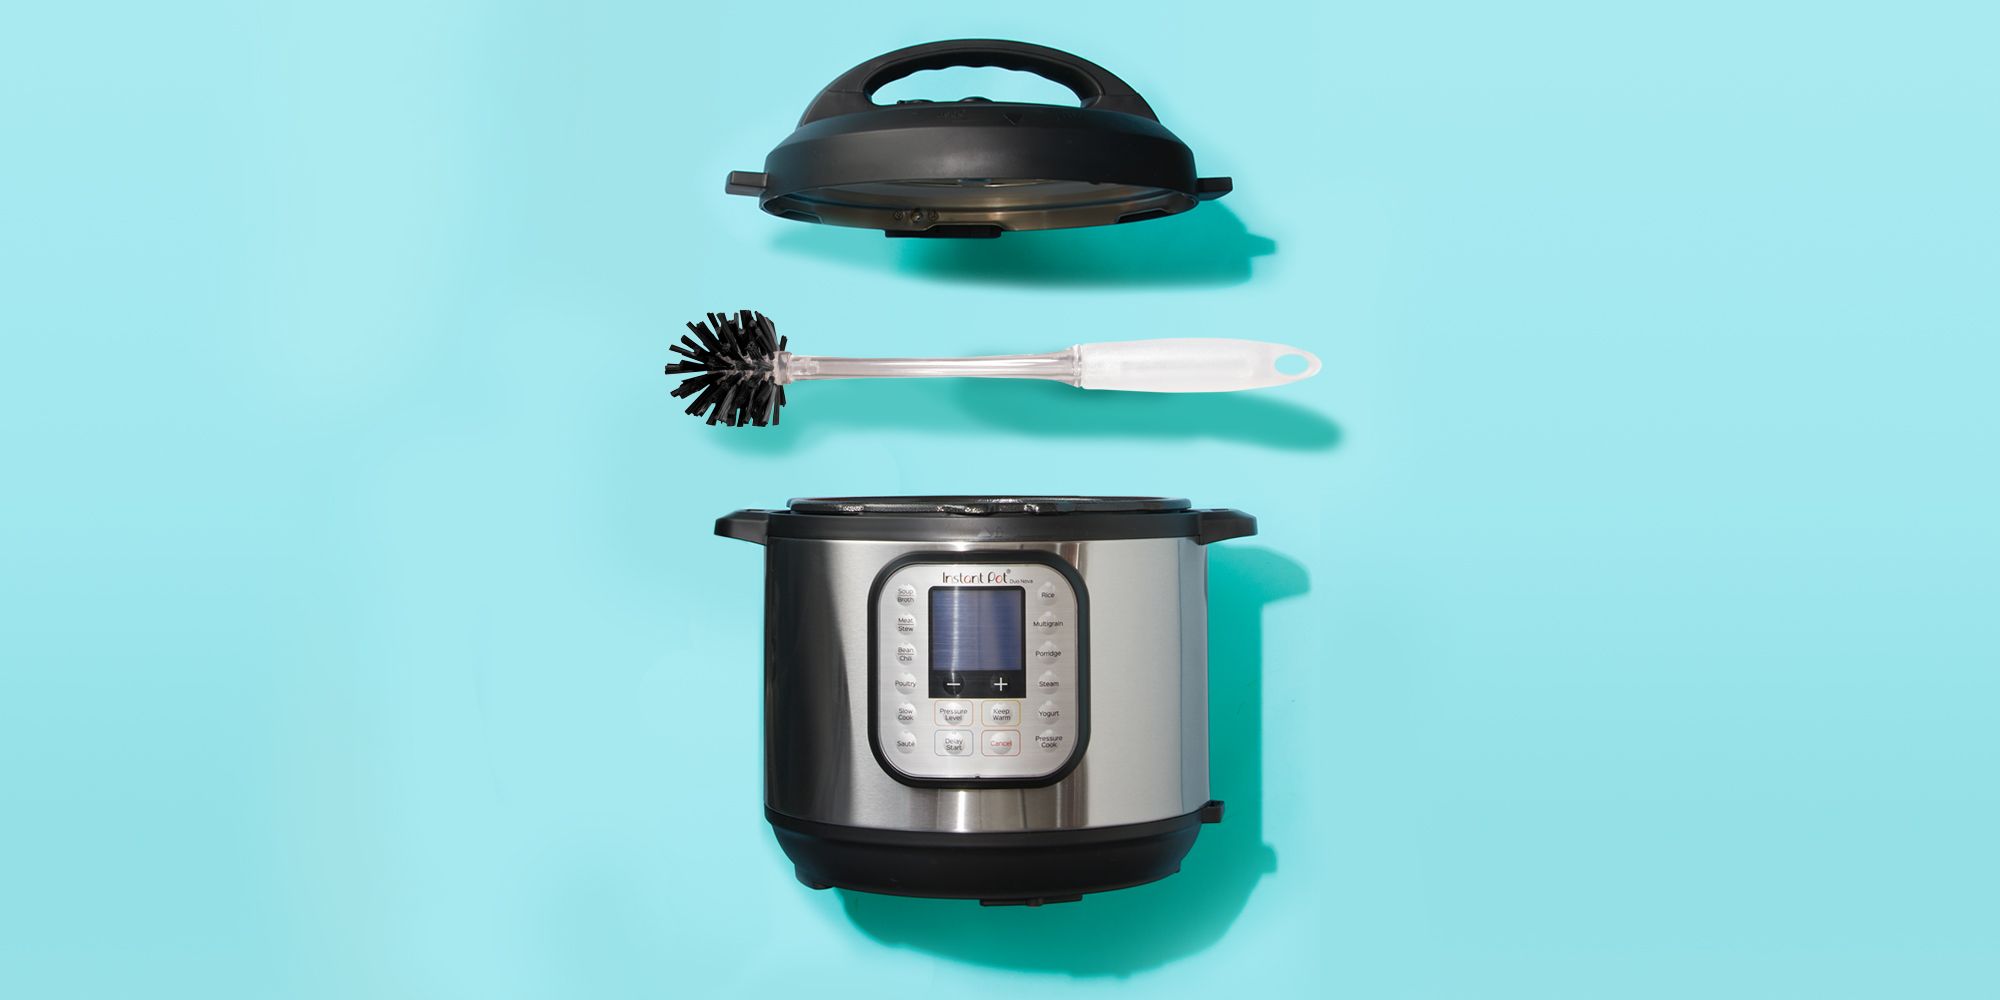 How to clean all the different parts of the Instant Pot lids